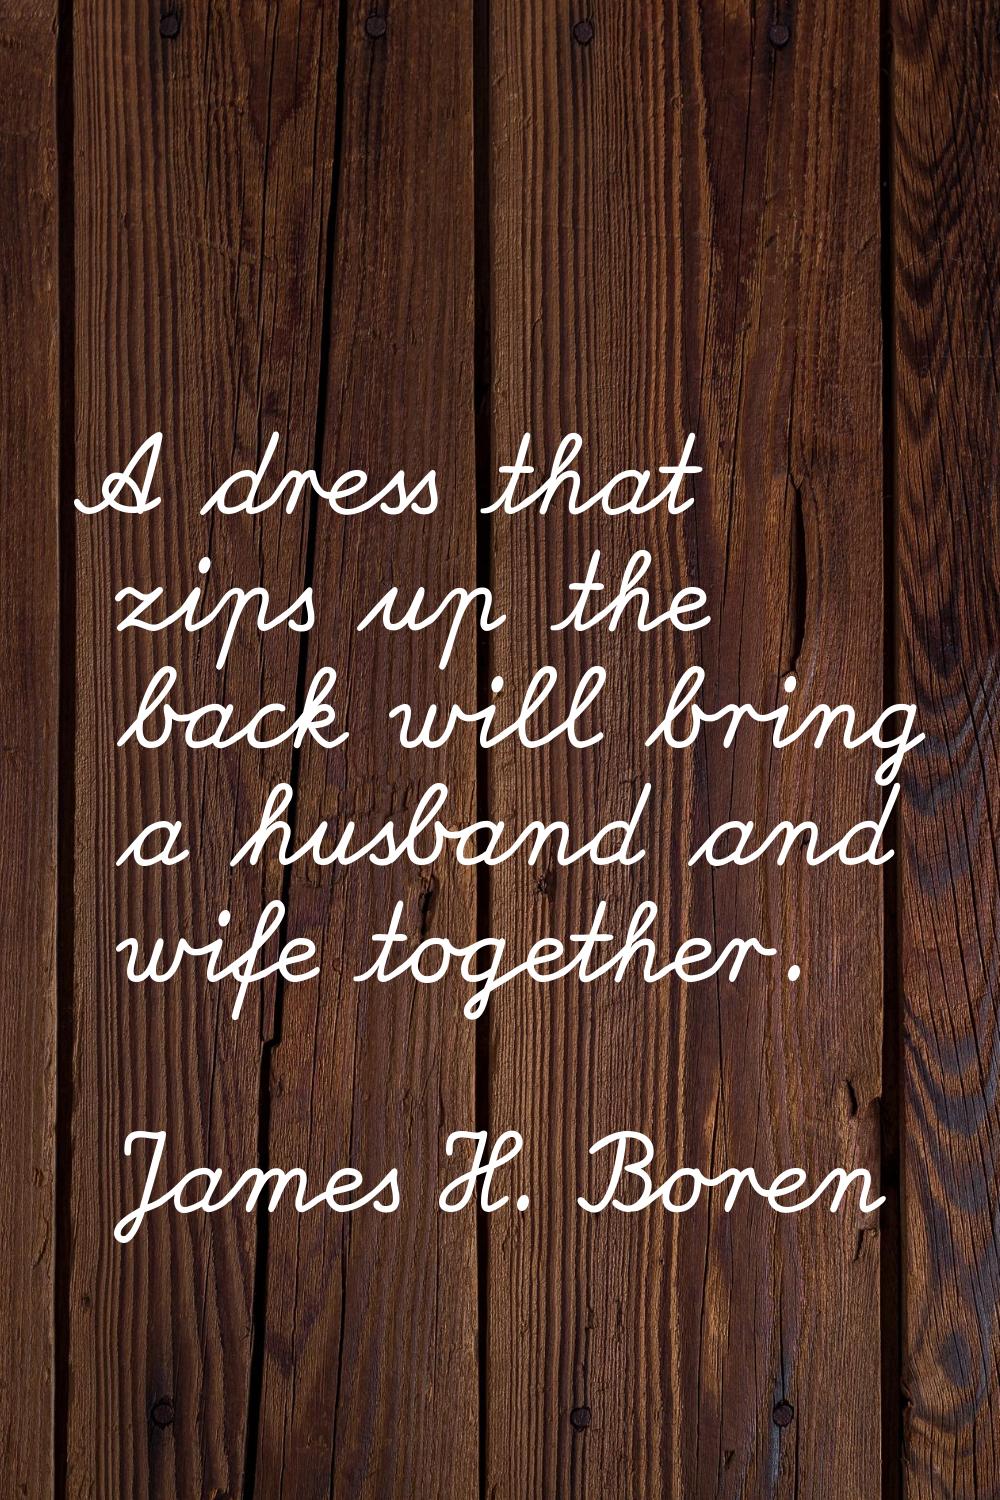 A dress that zips up the back will bring a husband and wife together.